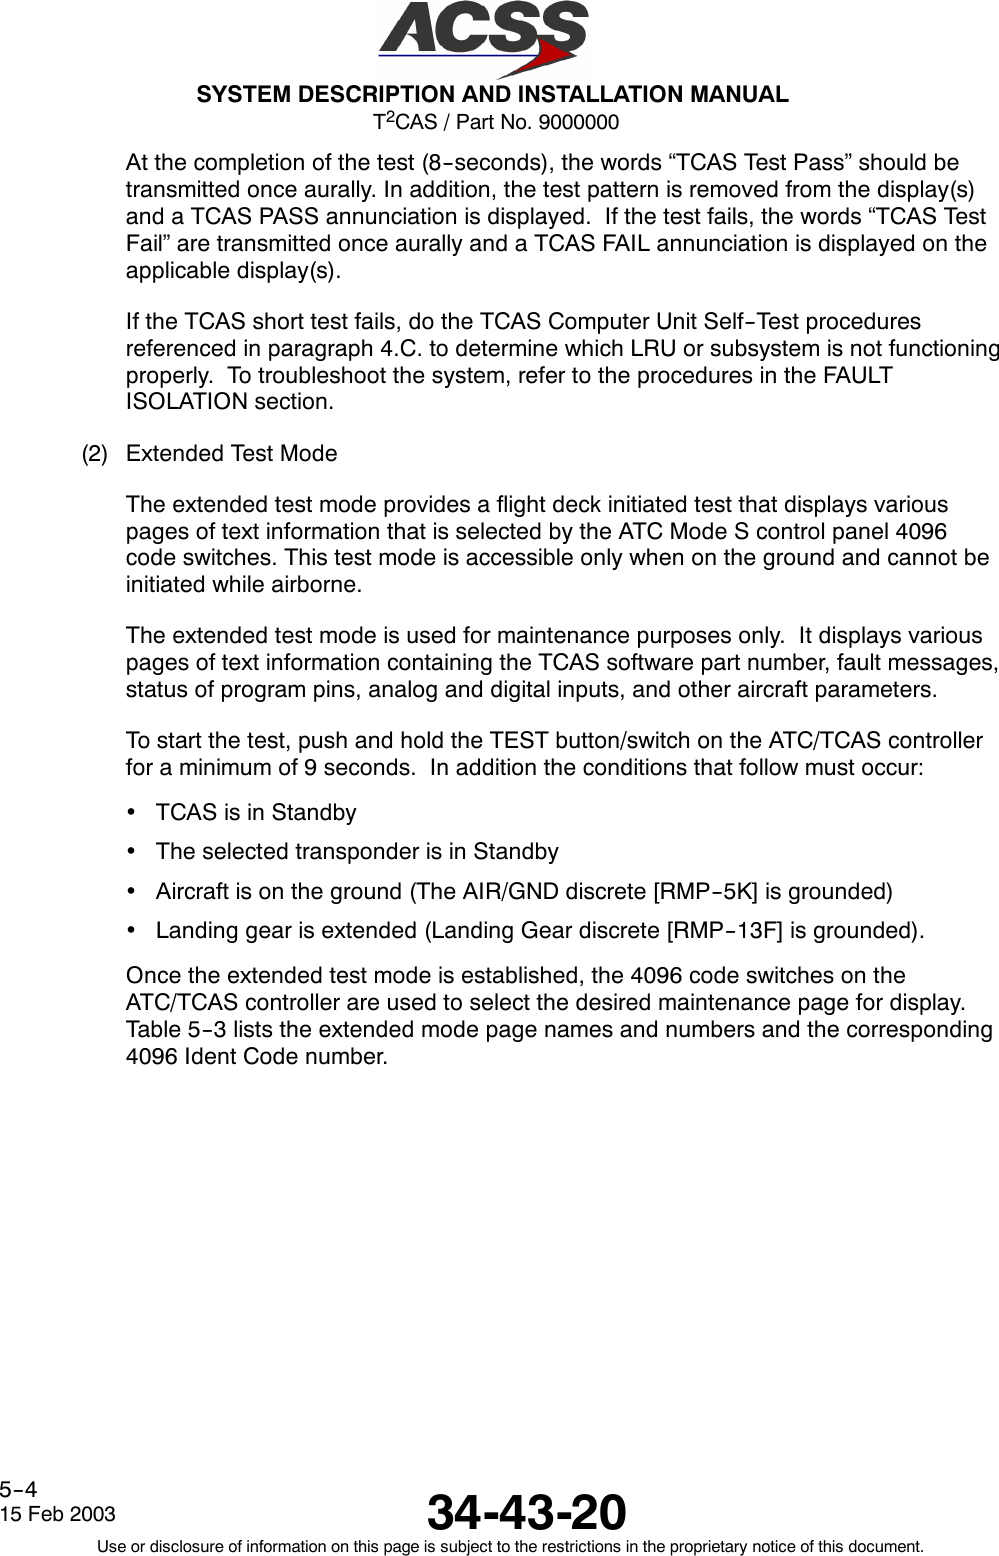 T2CAS / Part No. 9000000SYSTEM DESCRIPTION AND INSTALLATION MANUAL34-43-2015 Feb 2003Use or disclosure of information on this page is subject to the restrictions in the proprietary notice of this document.5--4At the completion of the test (8--seconds), the words “TCAS Test Pass” should betransmitted once aurally. In addition, the test pattern is removed from the display(s)and a TCAS PASS annunciation is displayed. If the test fails, the words “TCAS TestFail” are transmitted once aurally and a TCAS FAIL annunciation is displayed on theapplicable display(s).If the TCAS short test fails, do the TCAS Computer Unit Self--Test proceduresreferenced in paragraph 4.C. to determine which LRU or subsystem is not functioningproperly. To troubleshoot the system, refer to the procedures in the FAULTISOLATION section.(2) Extended Test ModeThe extended test mode provides a flight deck initiated test that displays variouspages of text information that is selected by the ATC Mode S control panel 4096code switches. This test mode is accessible only when on the ground and cannot beinitiated while airborne.The extended test mode is used for maintenance purposes only. It displays variouspages of text information containing the TCAS software part number, fault messages,status of program pins, analog and digital inputs, and other aircraft parameters.To start the test, push and hold the TEST button/switch on the ATC/TCAS controllerfor a minimum of 9 seconds. In addition the conditions that follow must occur:•TCAS is in Standby•The selected transponder is in Standby•Aircraft is on the ground (The AIR/GND discrete [RMP--5K] is grounded)•Landing gear is extended (Landing Gear discrete [RMP--13F] is grounded).Once the extended test mode is established, the 4096 code switches on theATC/TCAS controller are used to select the desired maintenance page for display.Table 5--3 lists the extended mode page names and numbers and the corresponding4096 Ident Code number.